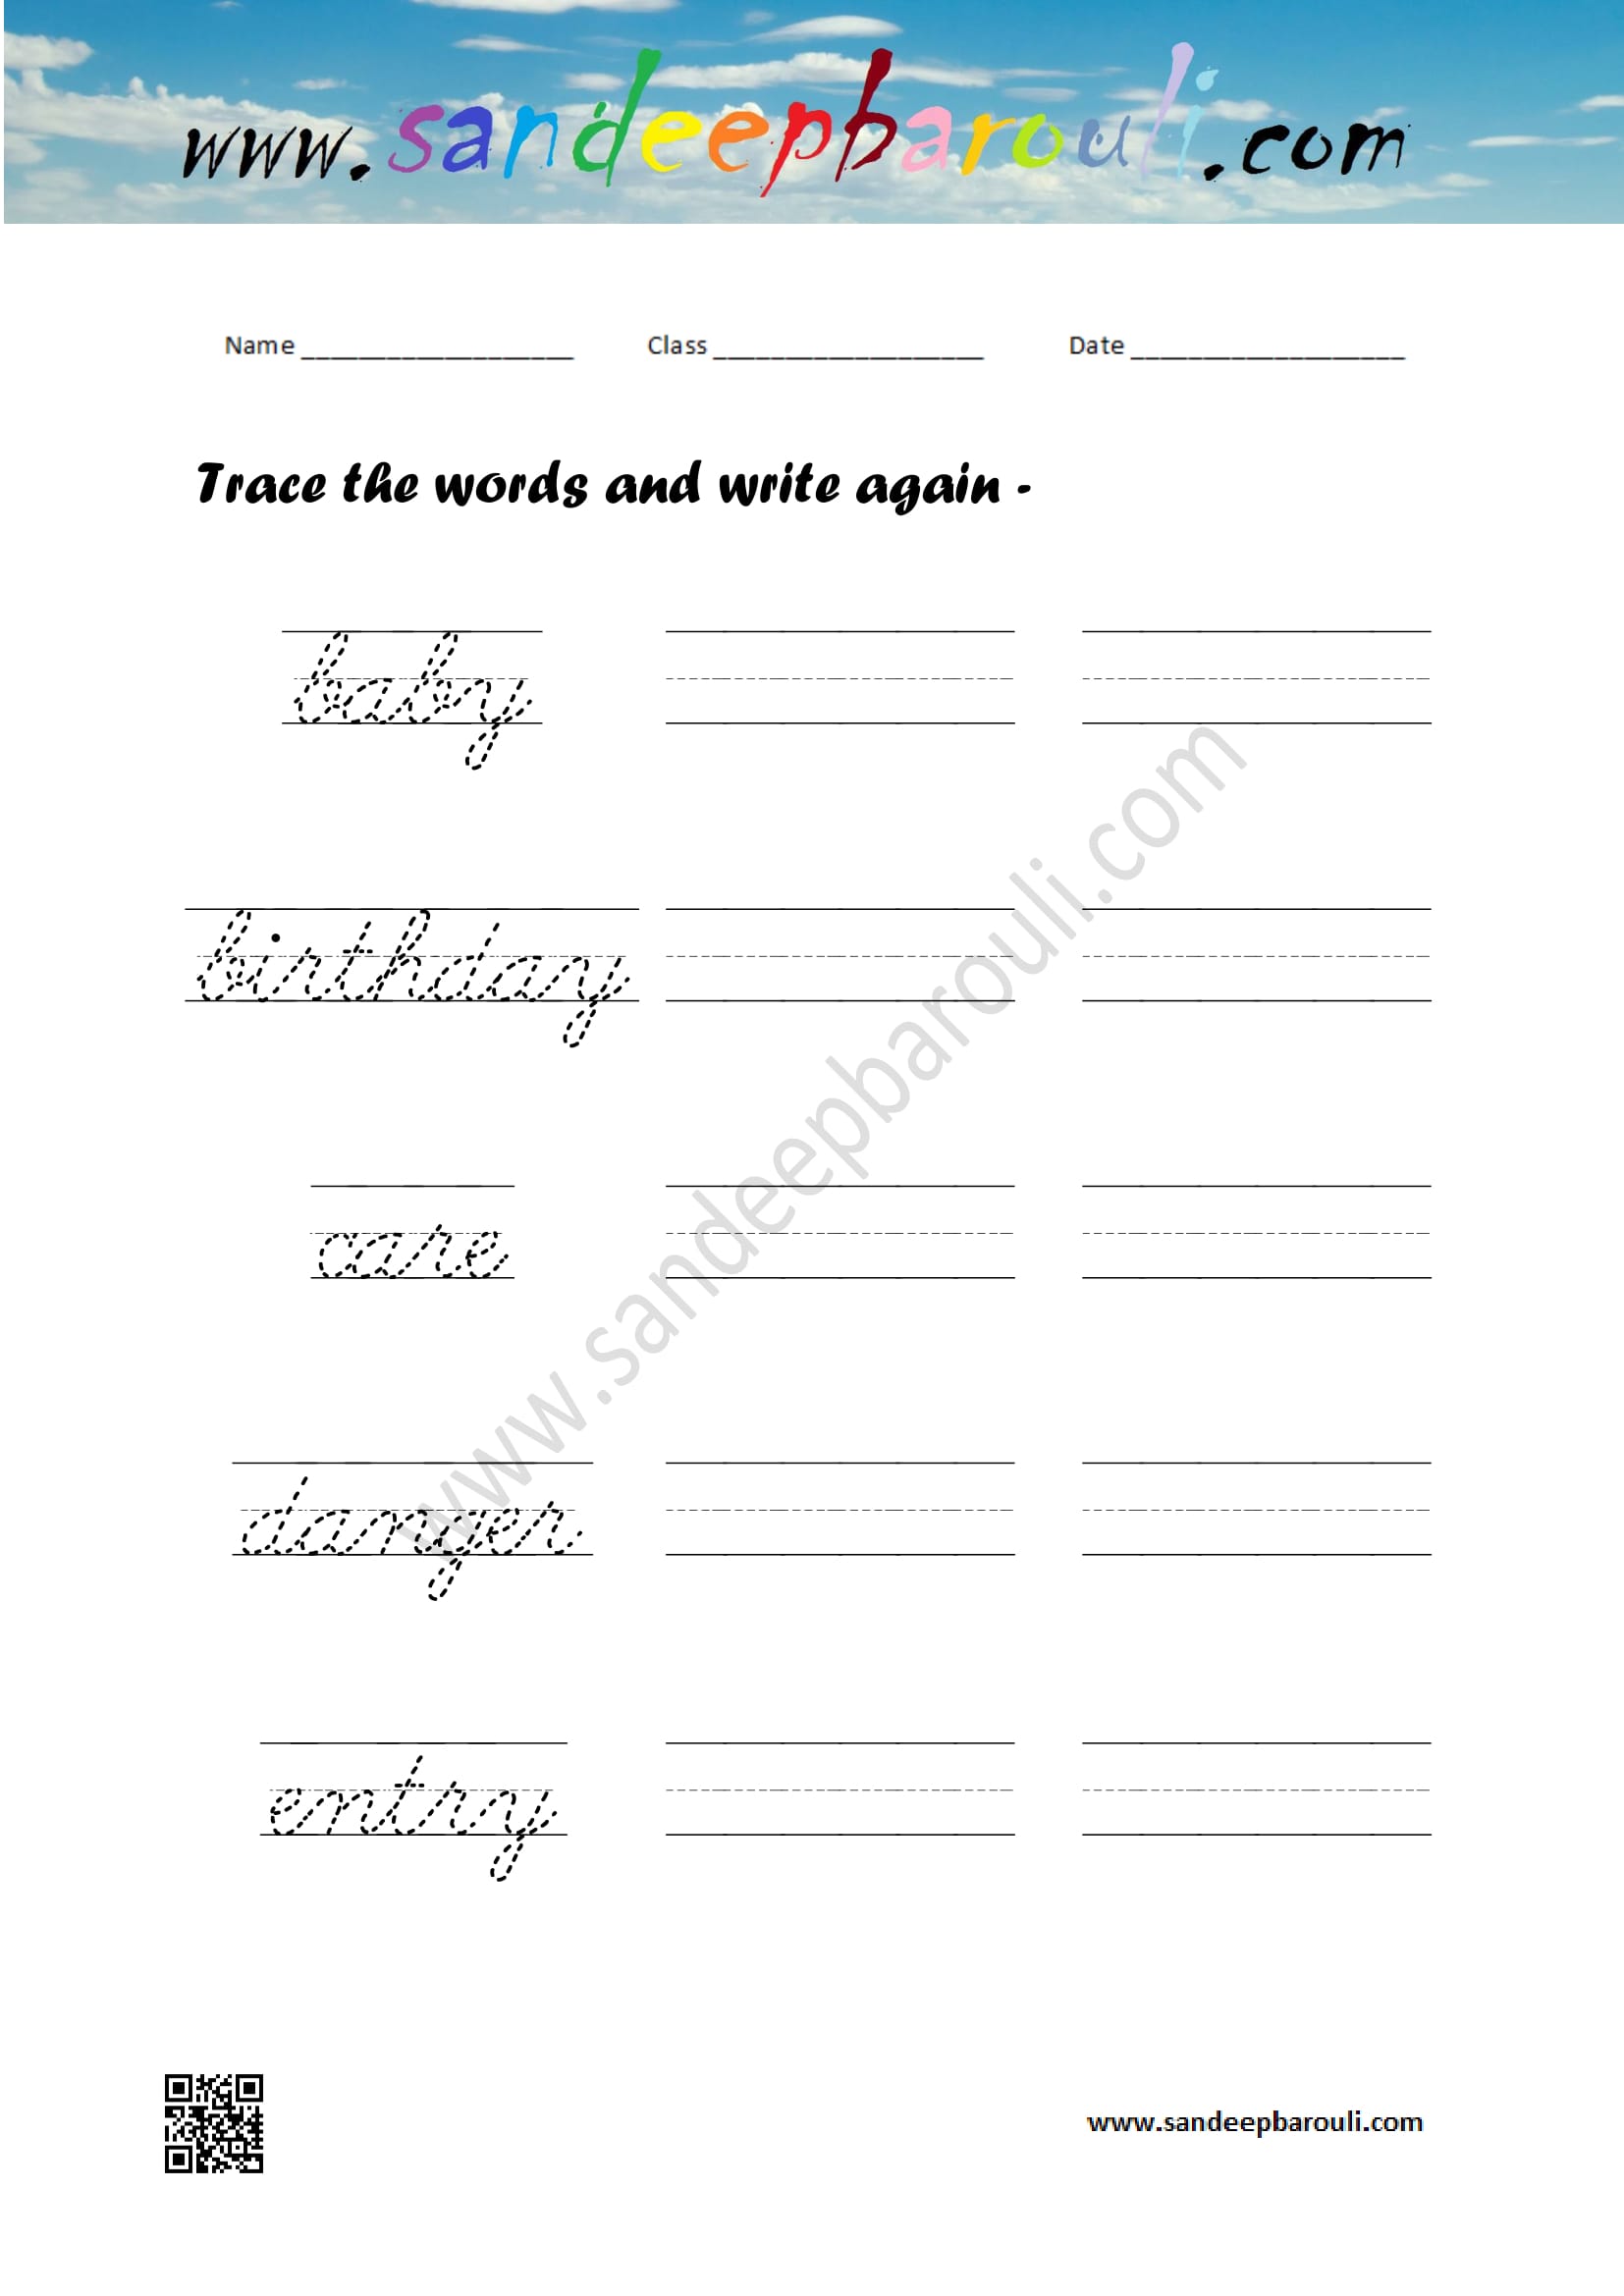 Cursive writing worksheet – trace the words and write again (67)